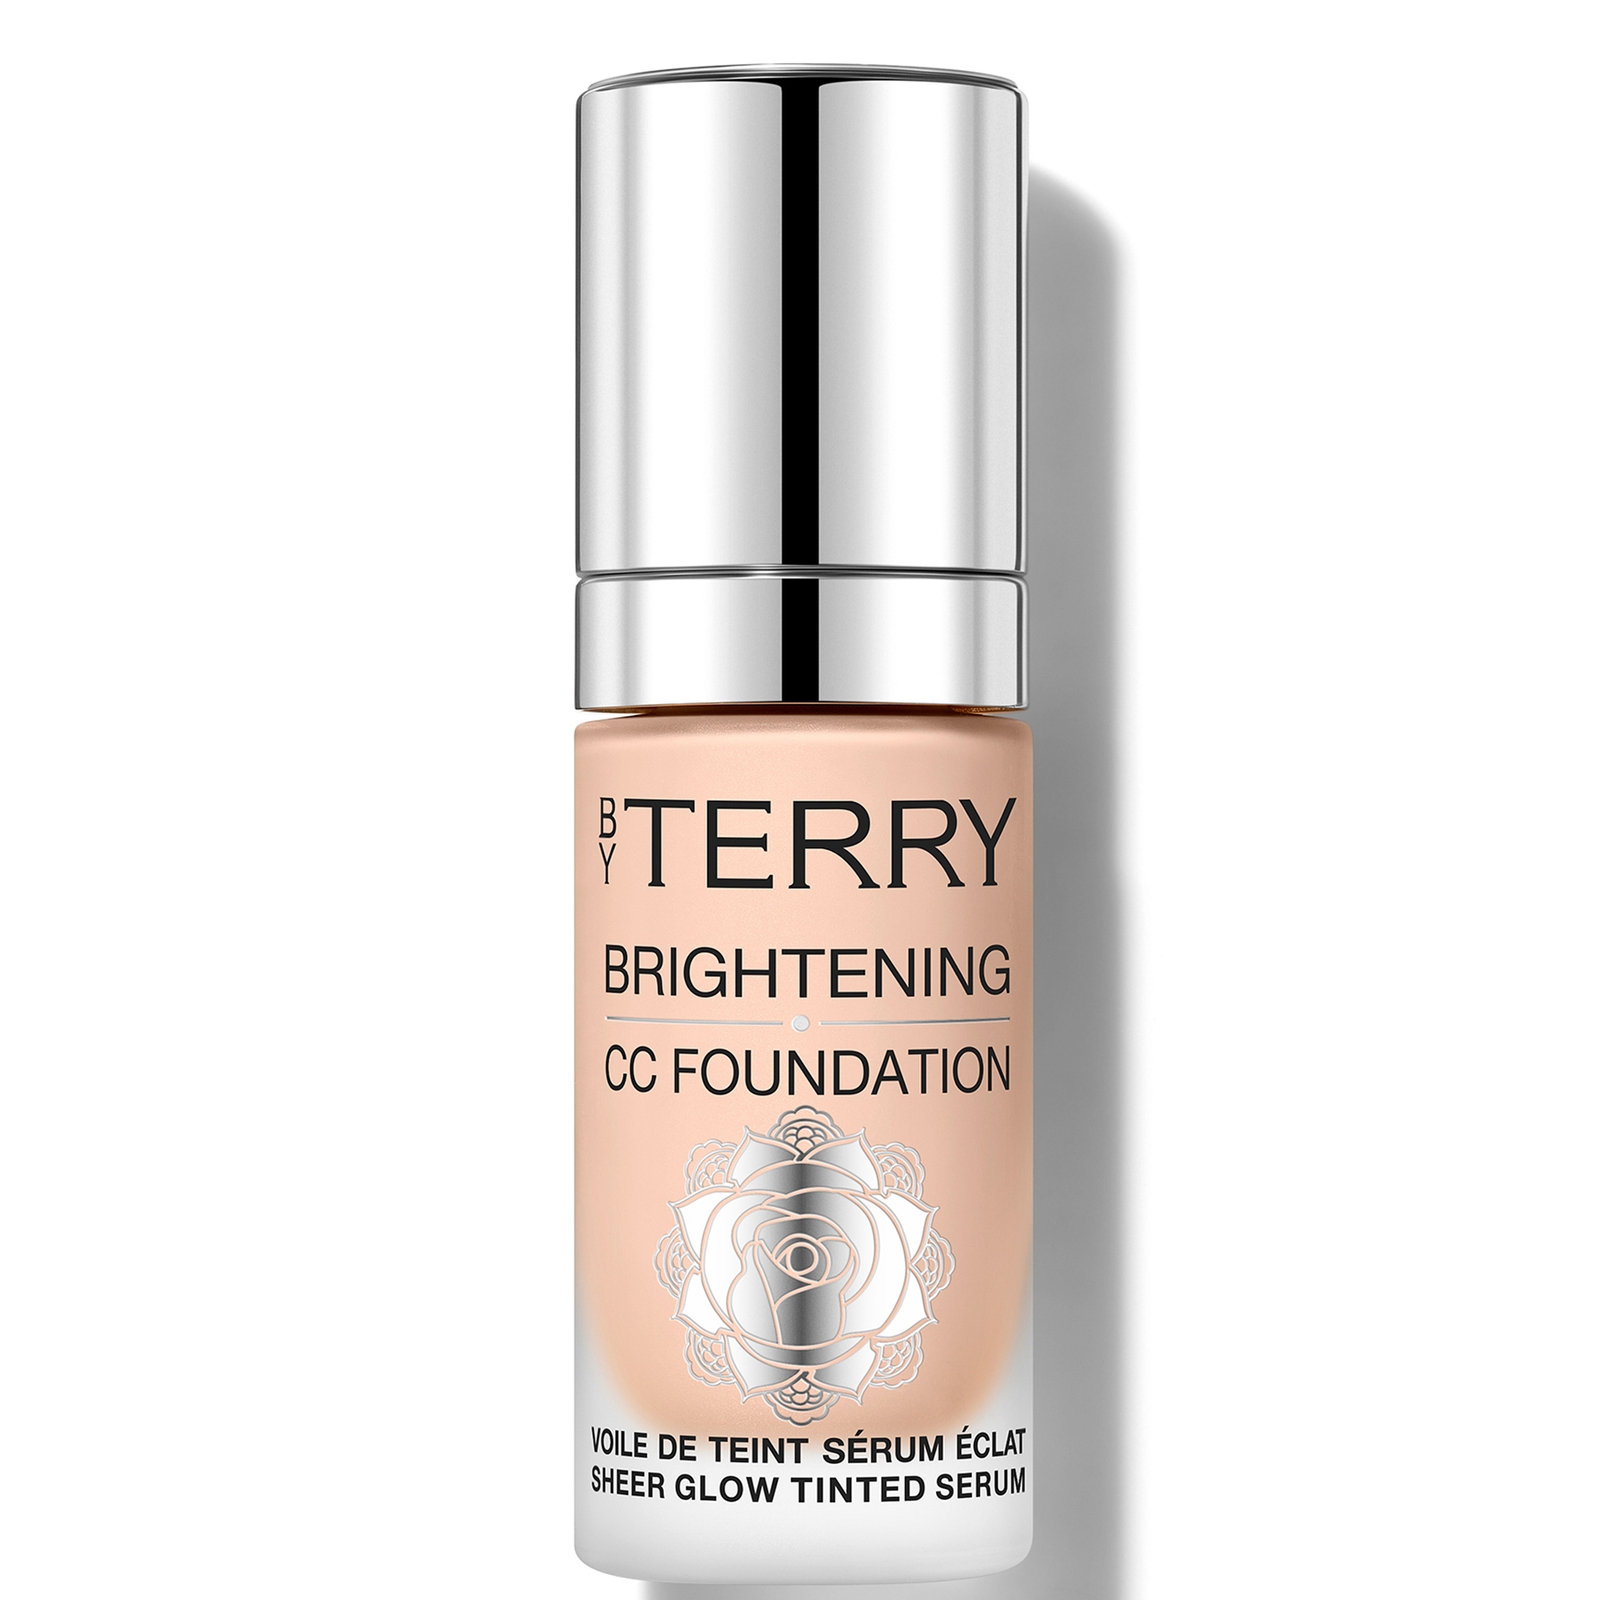 By Terry Brightening Cc Foundation 30ml (various Shades) - 2c In Brown